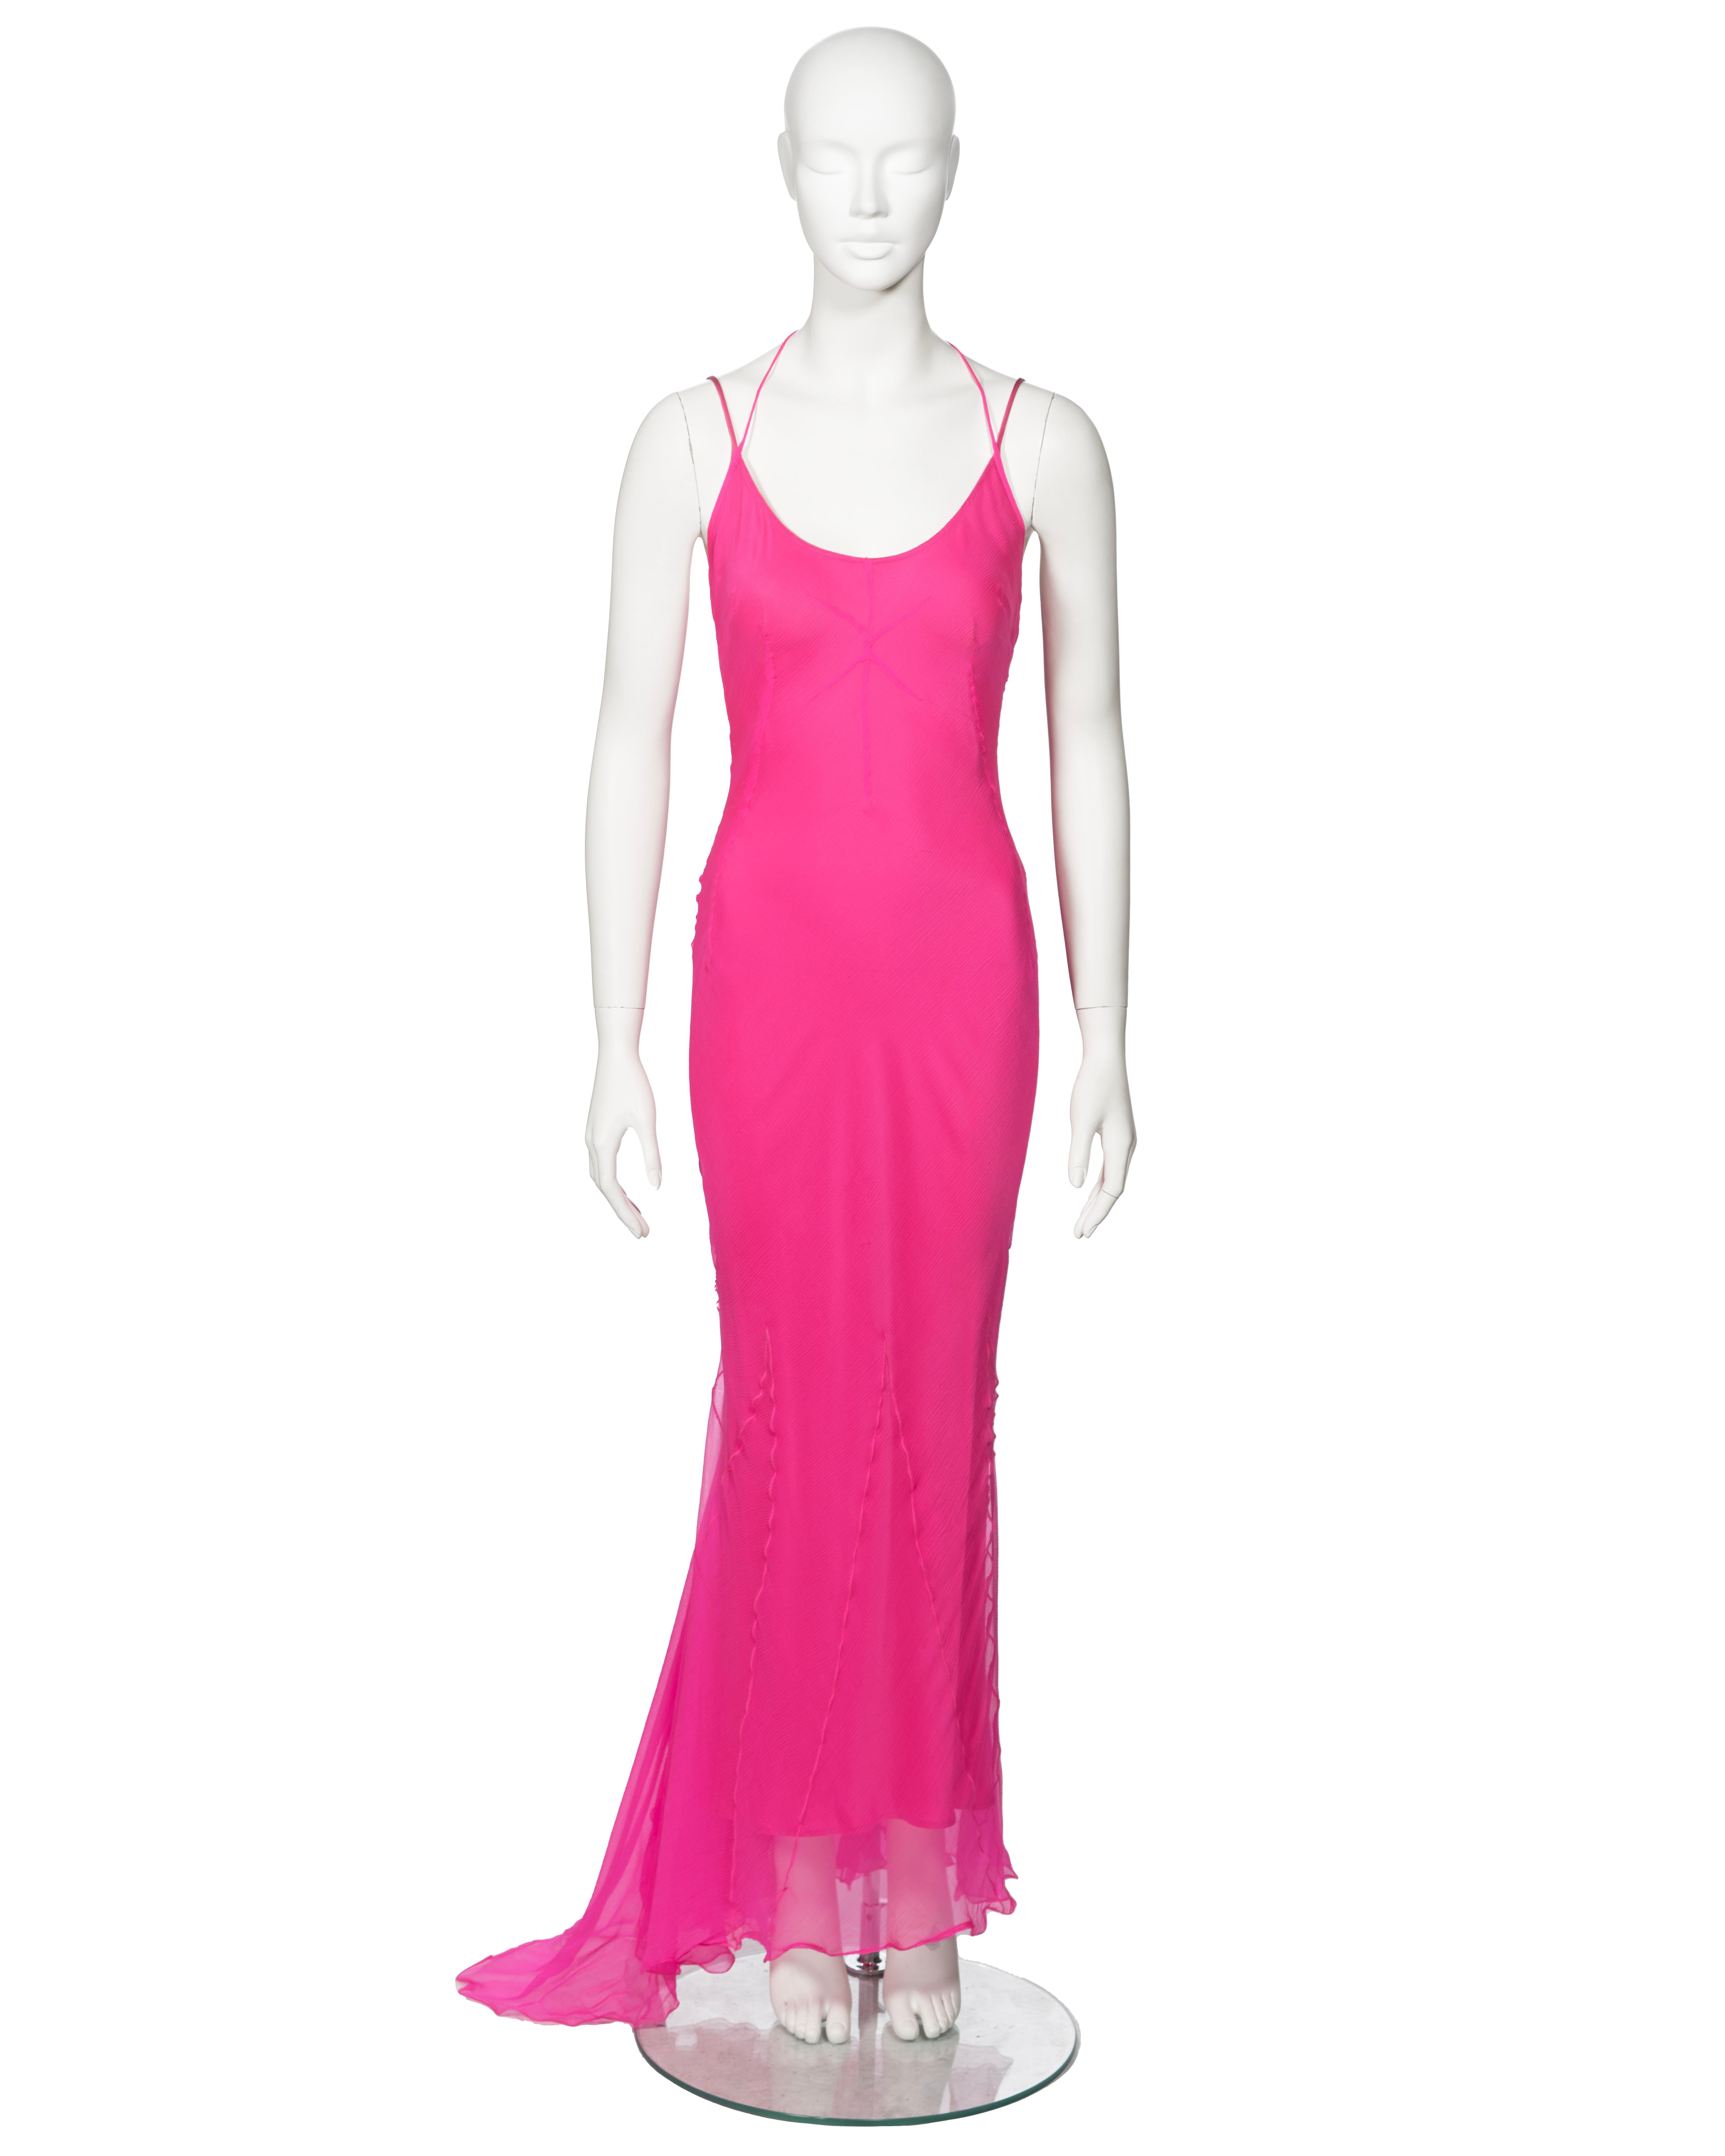 ▪ Archival Dolce & Gabbana Evening Dress
▪ Fall-Winter 2000
▪ Sold by One of a Kind Archive
▪ Crafted from bias-cut hot pink crinkled silk chiffon
▪ Halter neck ties 
▪ Integrated slip dress silk lining with spaghetti straps
▪ Floor-length skirt